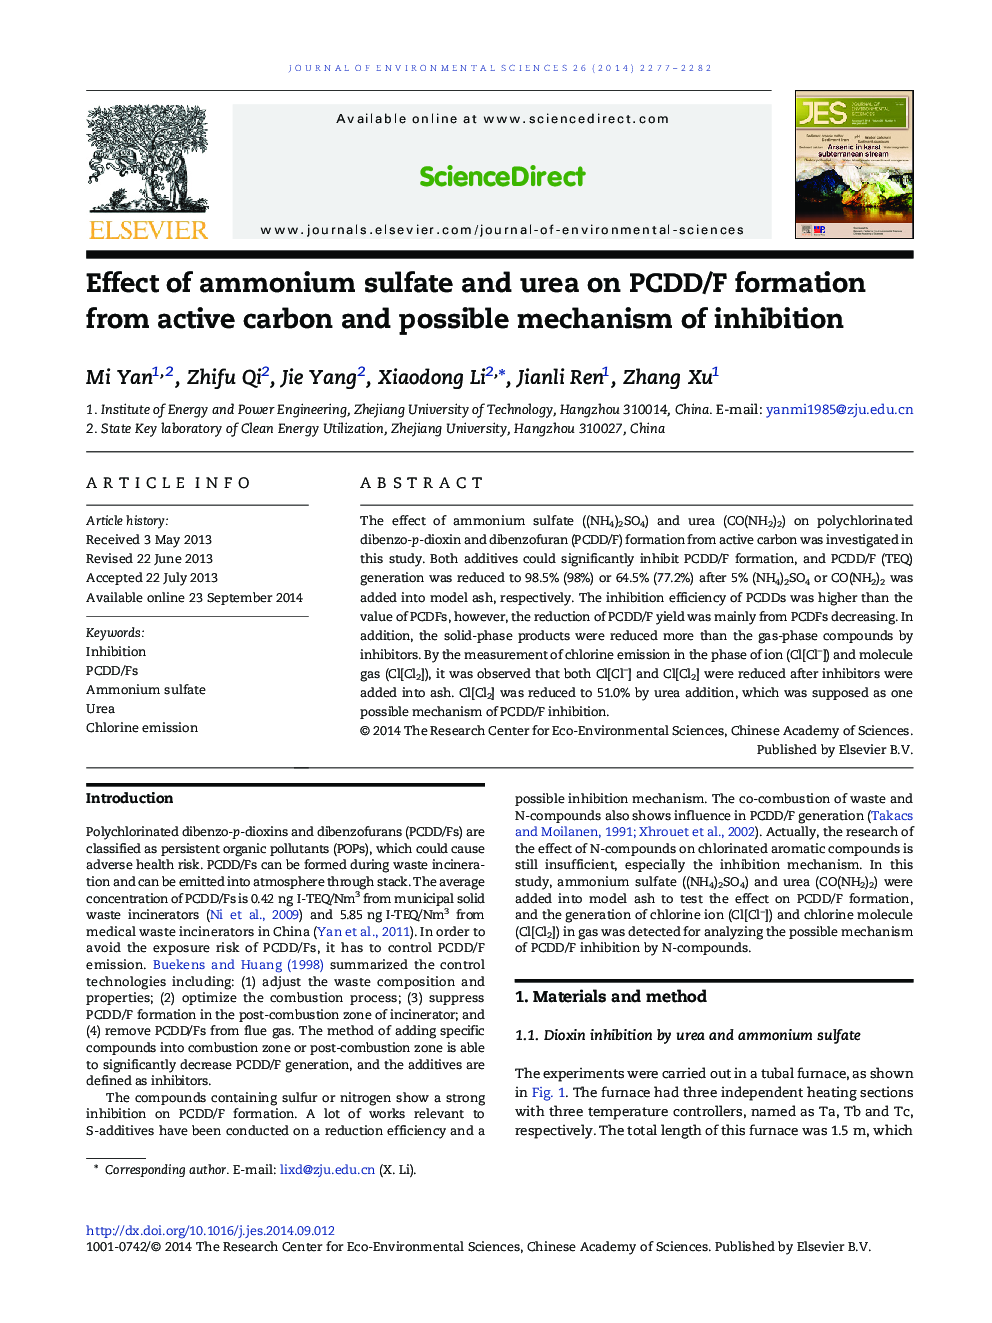 Effect of ammonium sulfate and urea on PCDD/F formation from active carbon and possible mechanism of inhibition